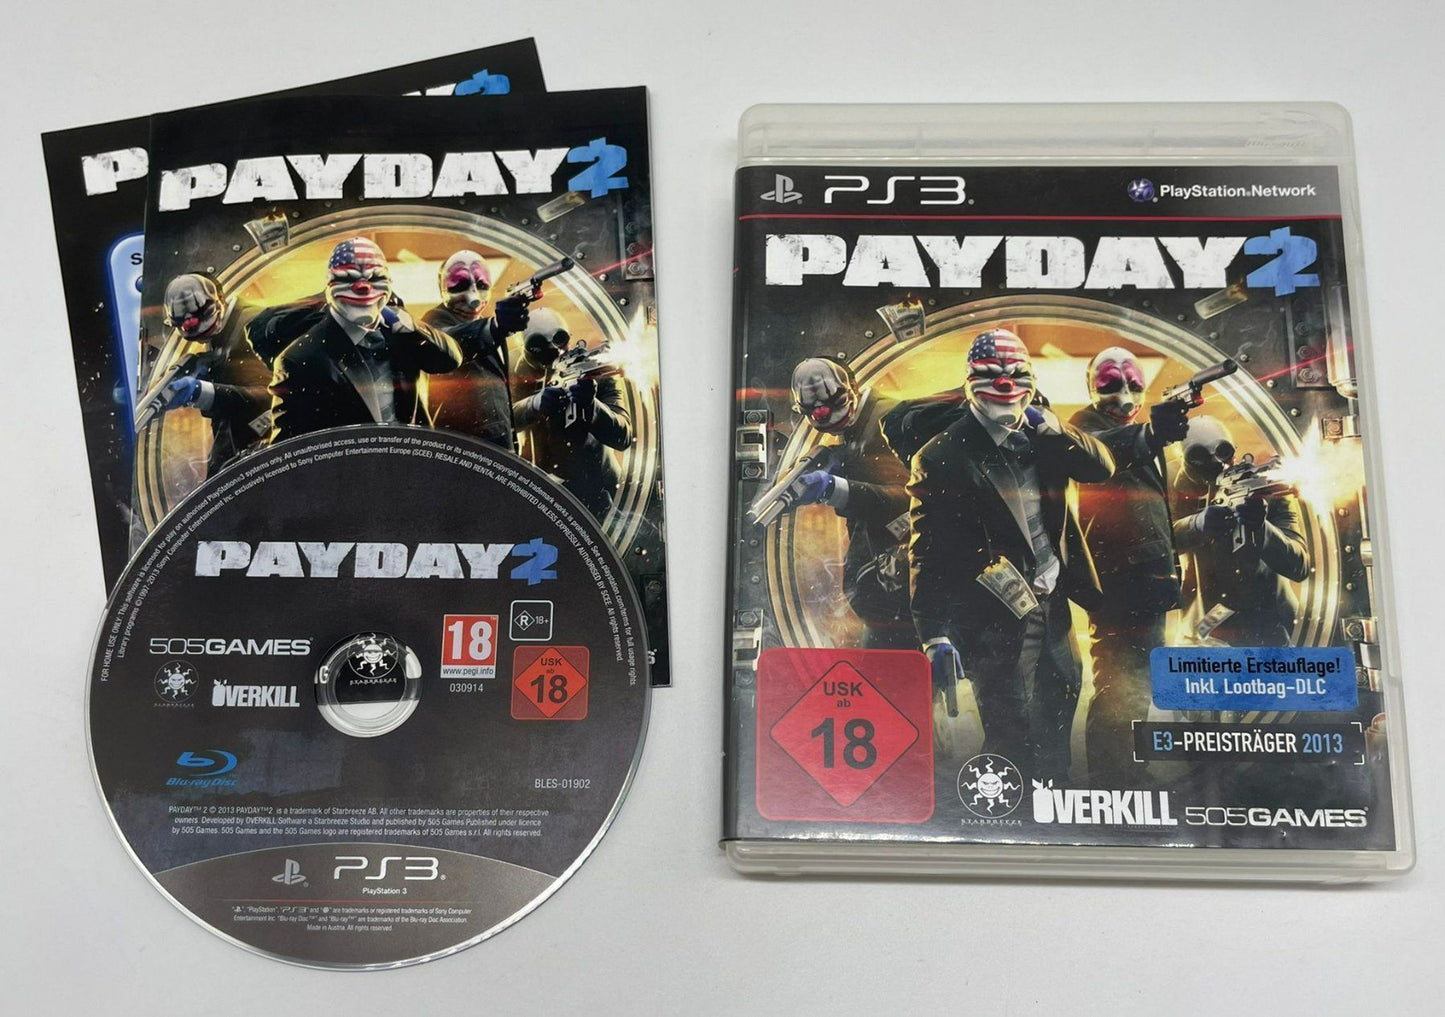 Payday 2 OVP